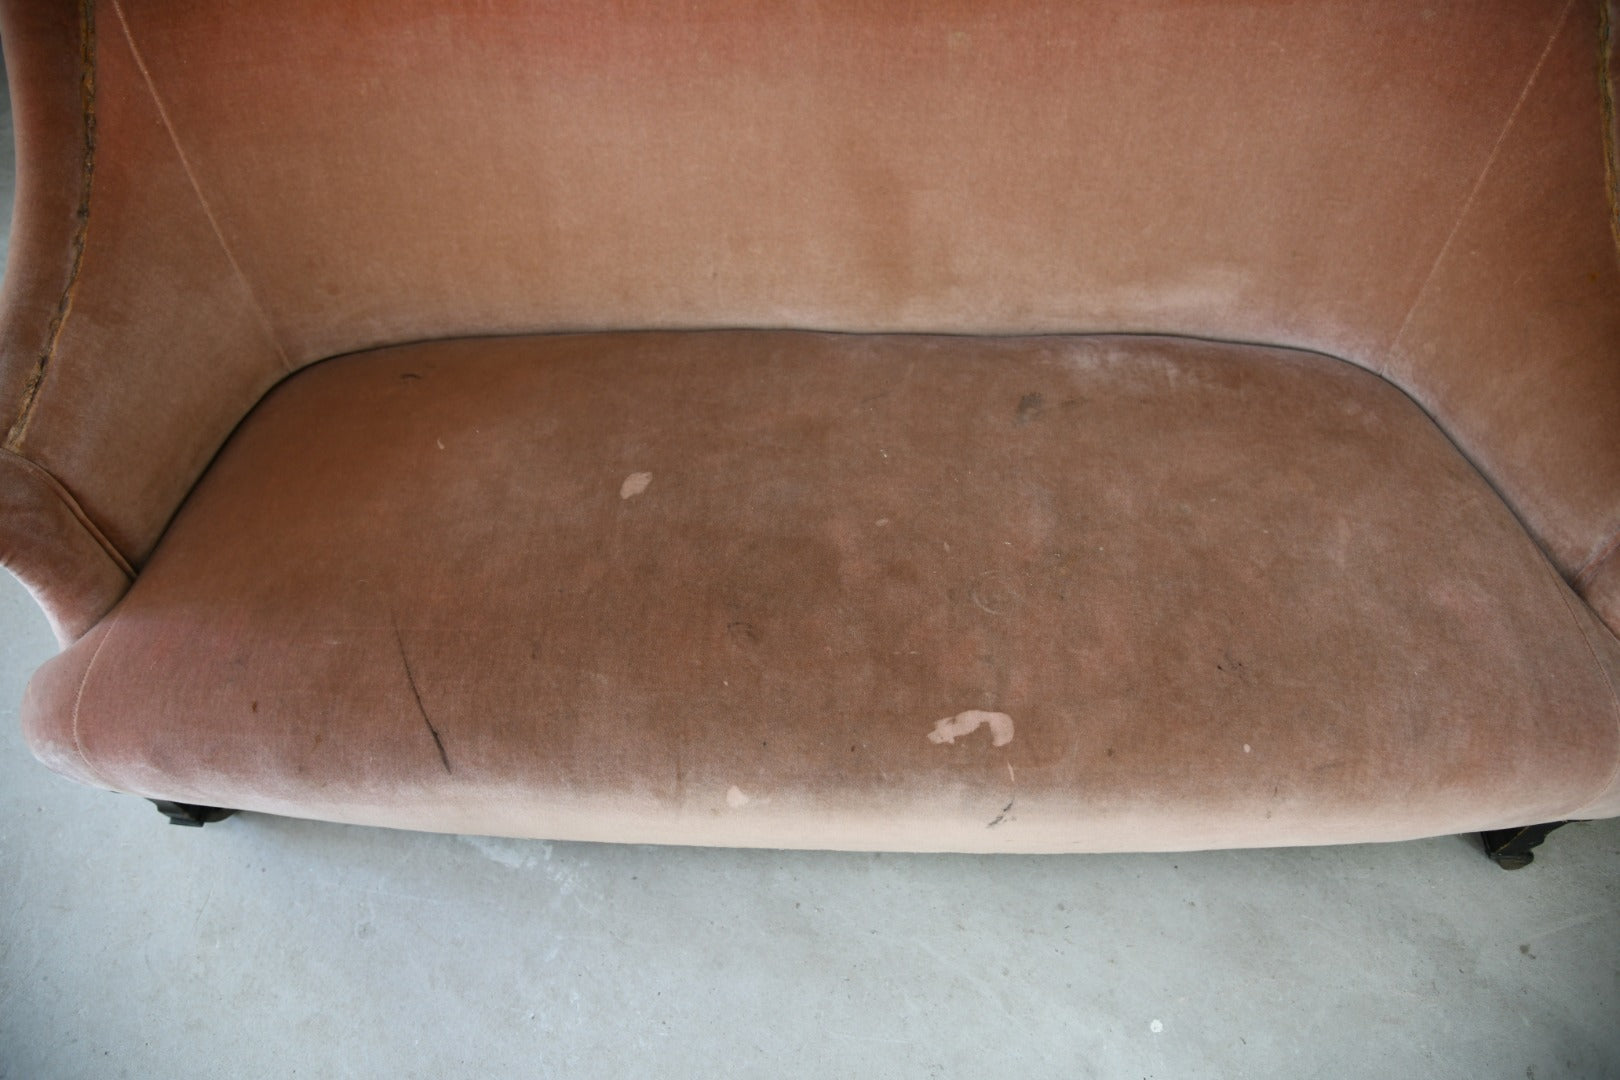 Antique French Upholstered Sofa